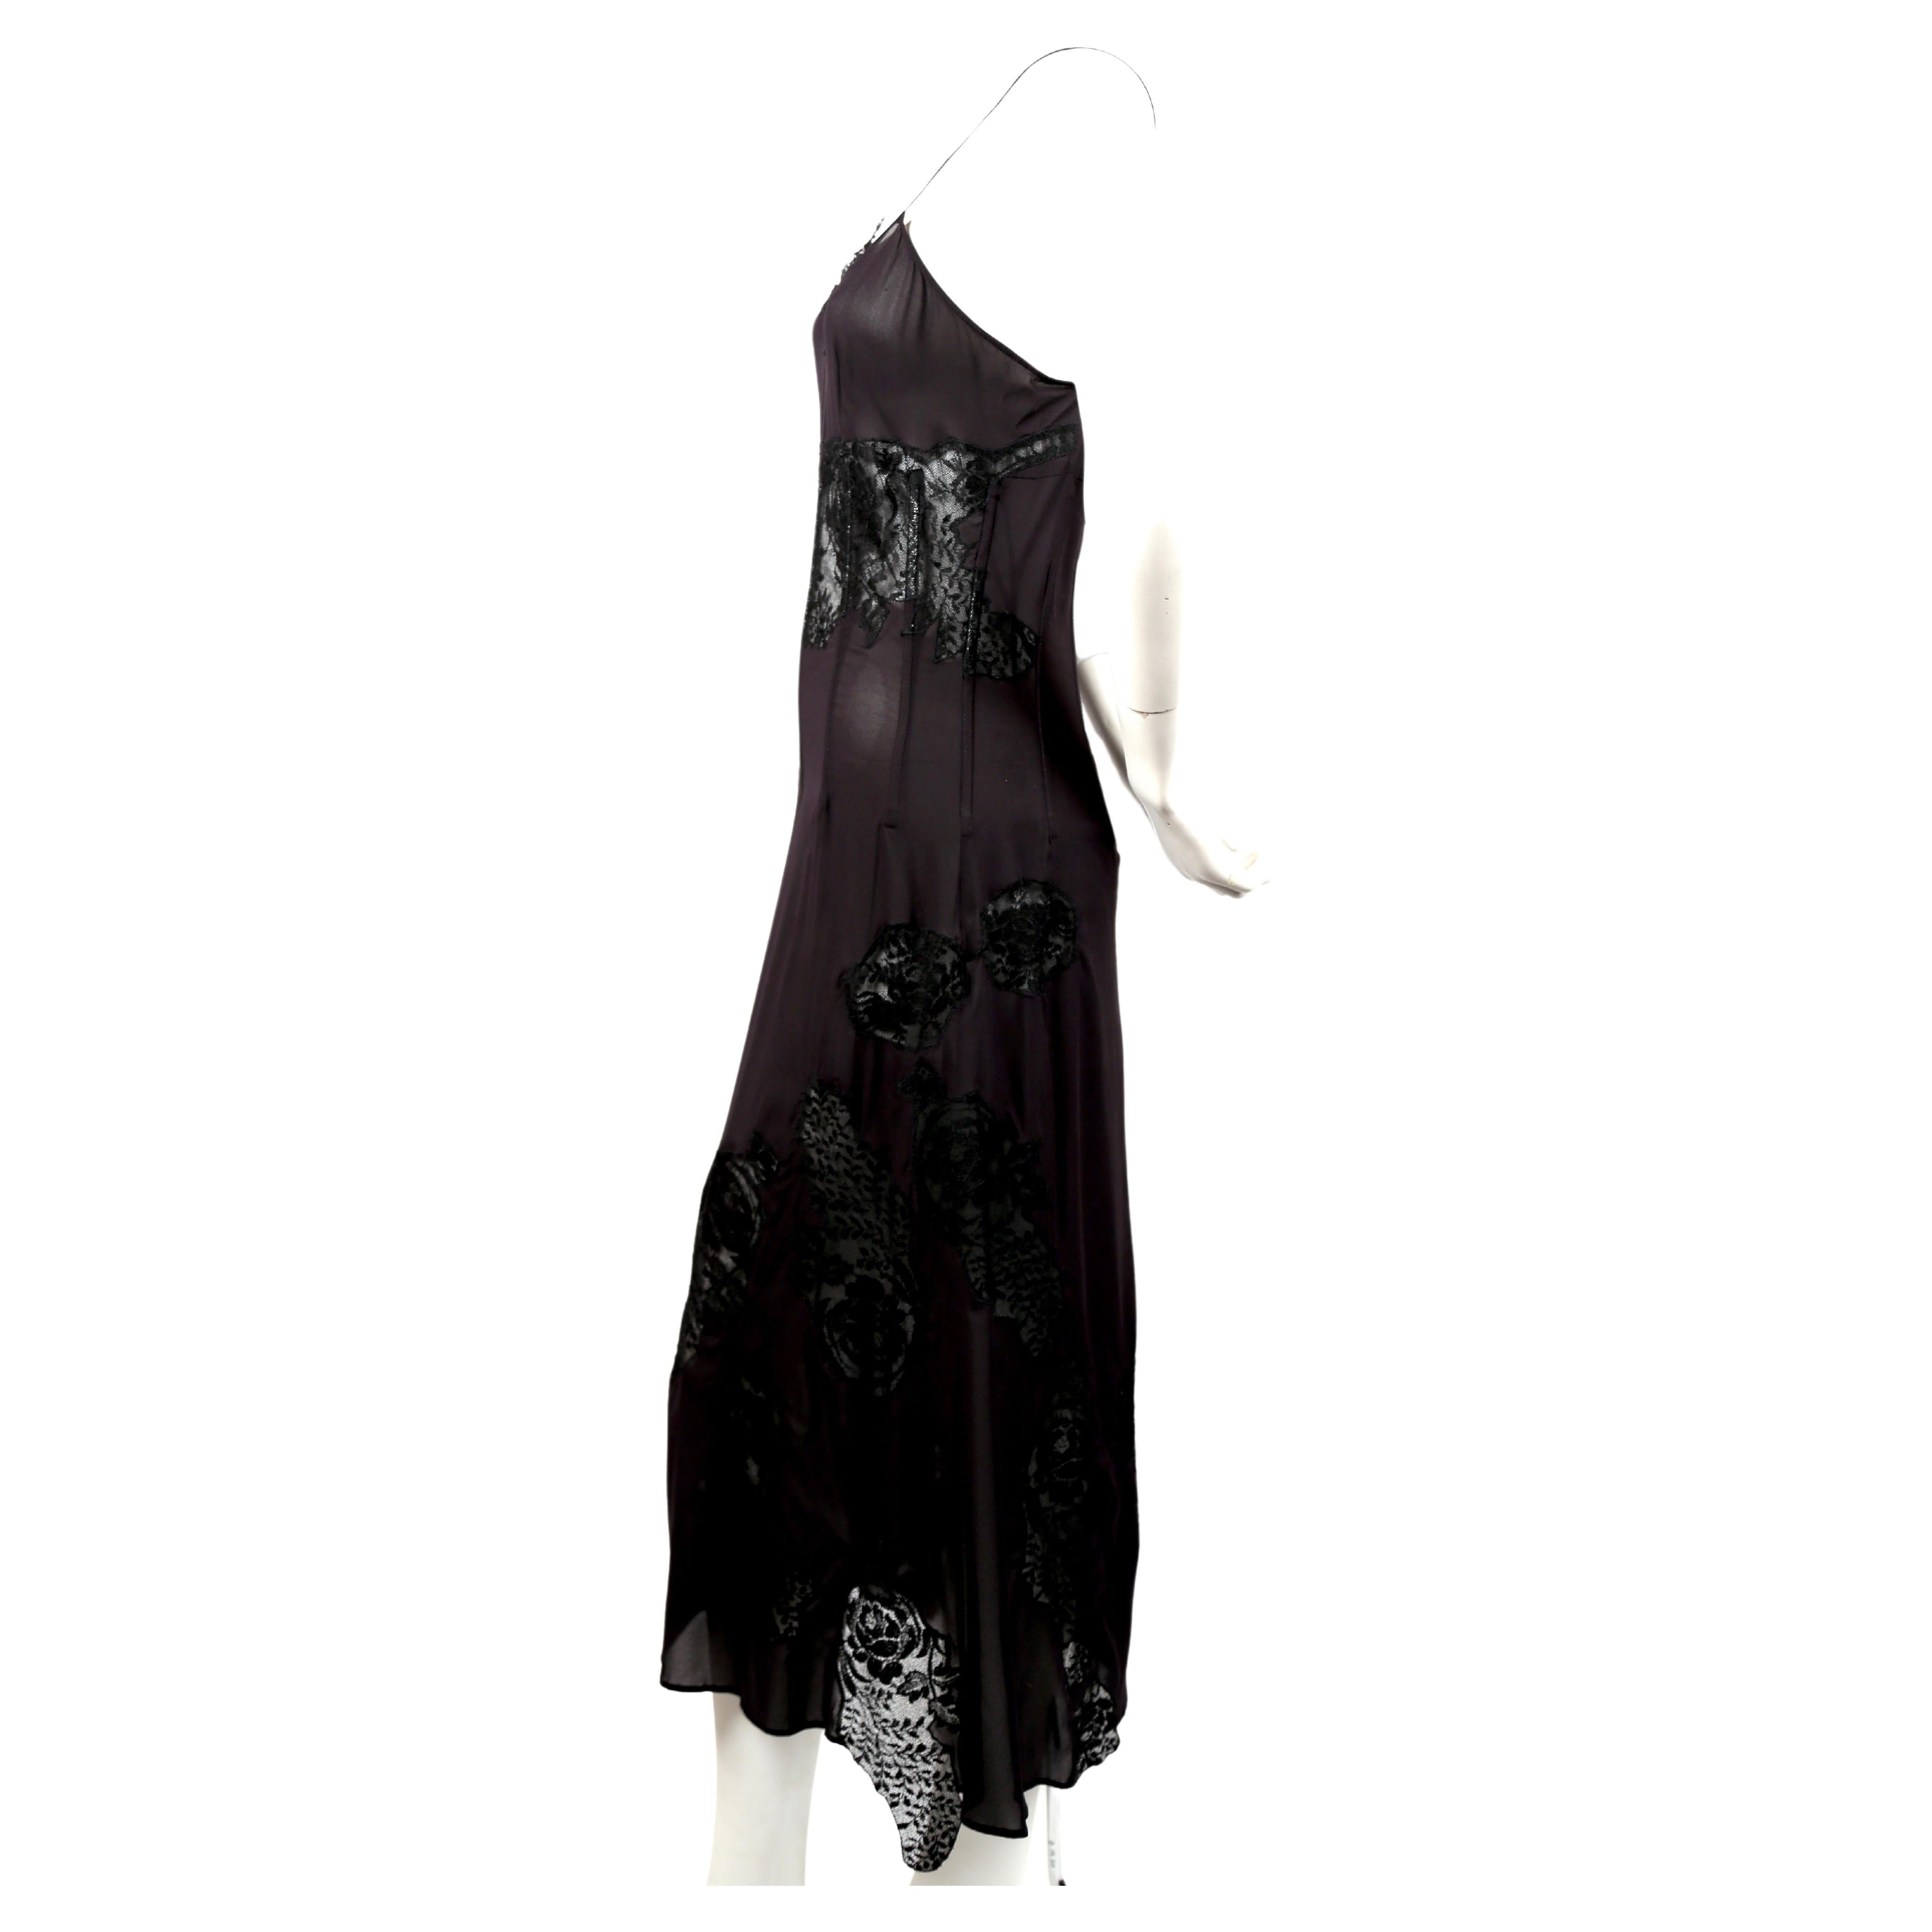 Jet-black lace and chiffon corset dress designed by Dolce & Gabbana exactly as seen on the spring 2002 runway. Italian size 44. Approximate measurements: 34